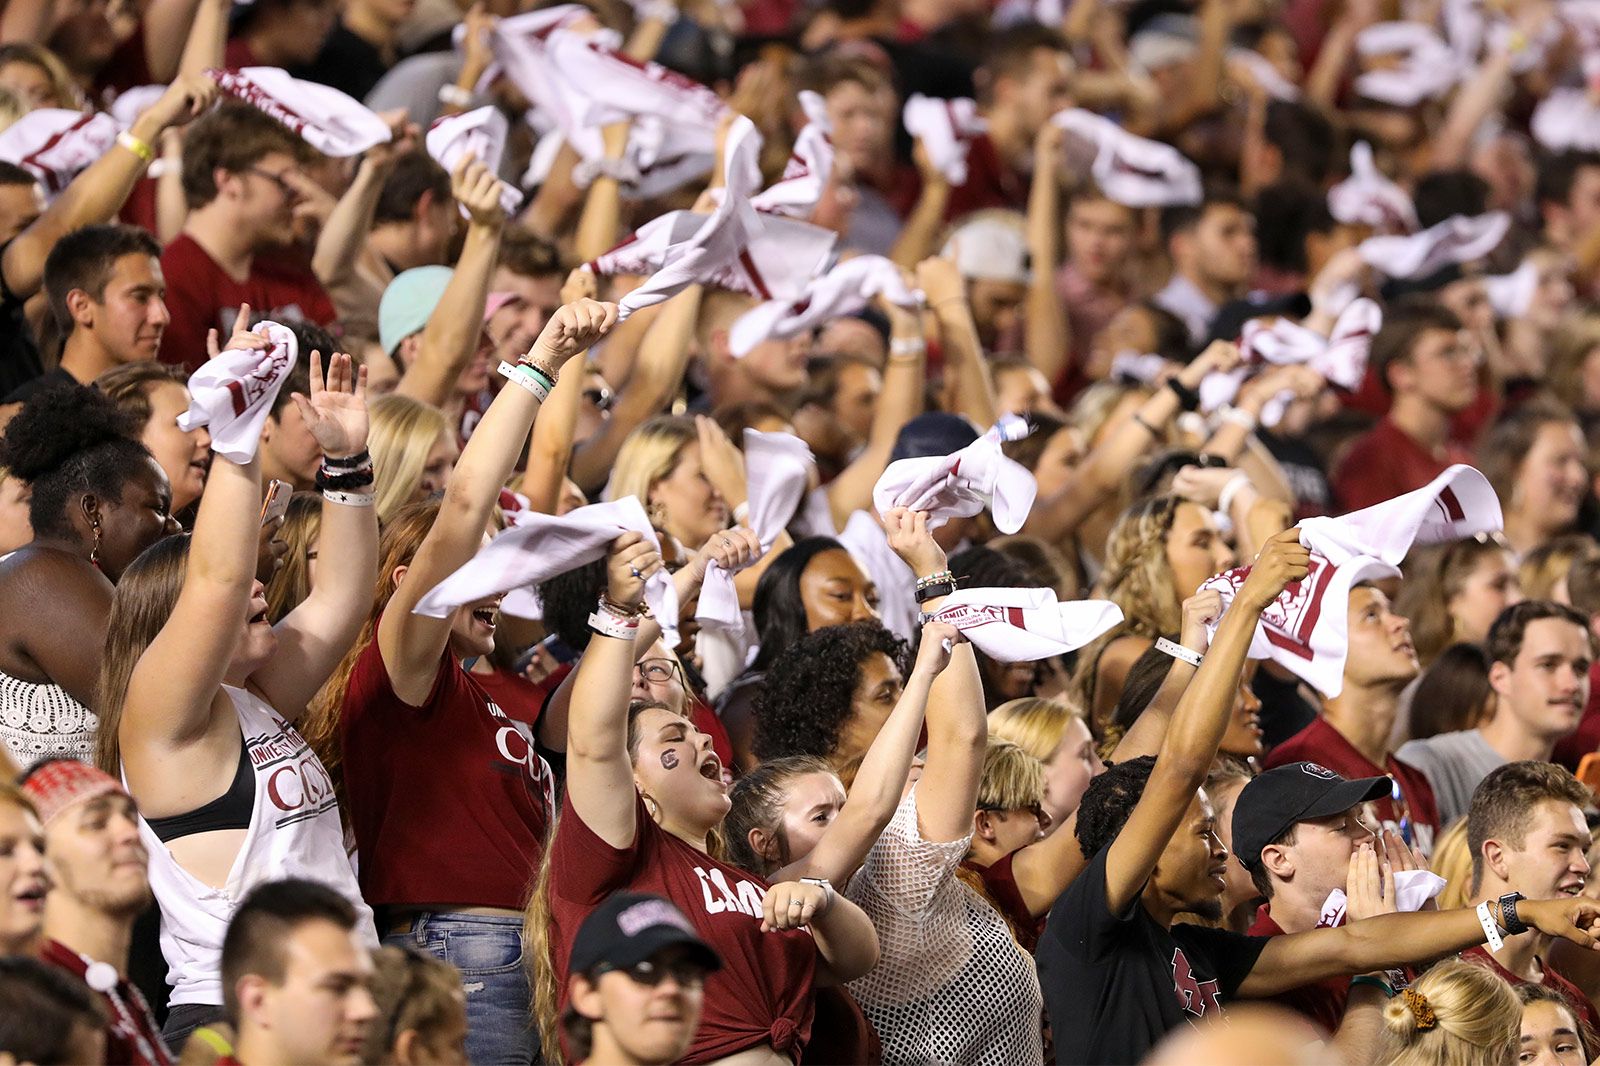 Large crowd of Gamecock students cheering in the stands at Williams Brice Stadium with arms raised, twirling towels in the air.